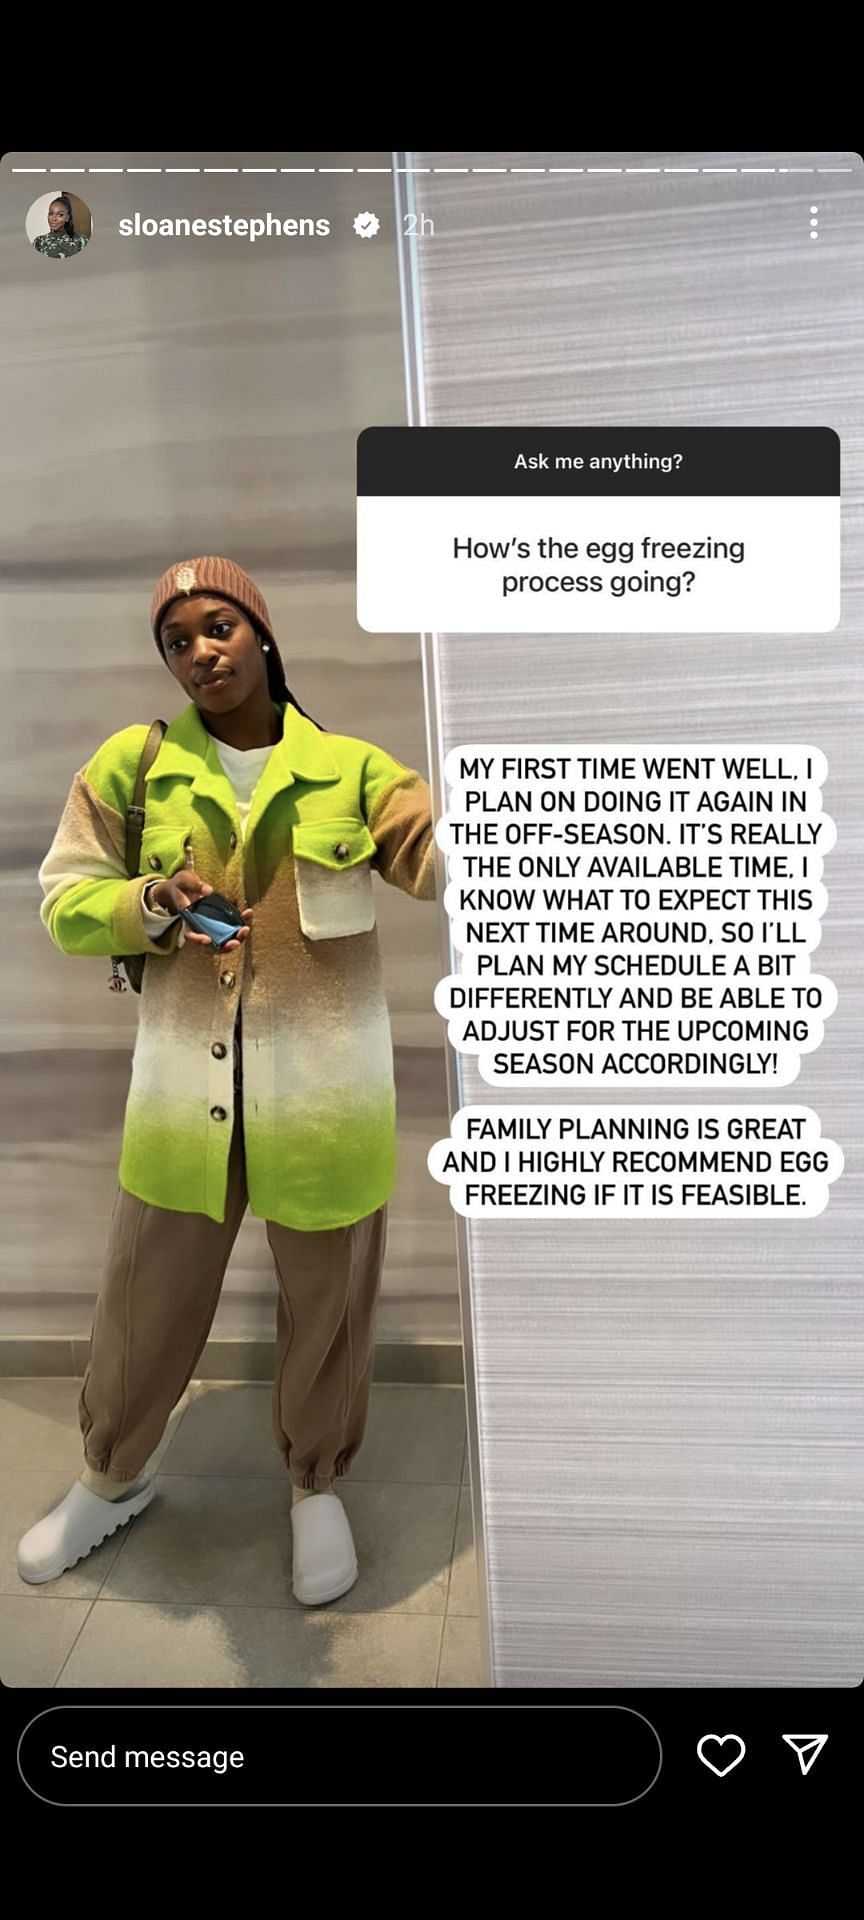 Sloane Stephens reveals how her egg-freezing process is going